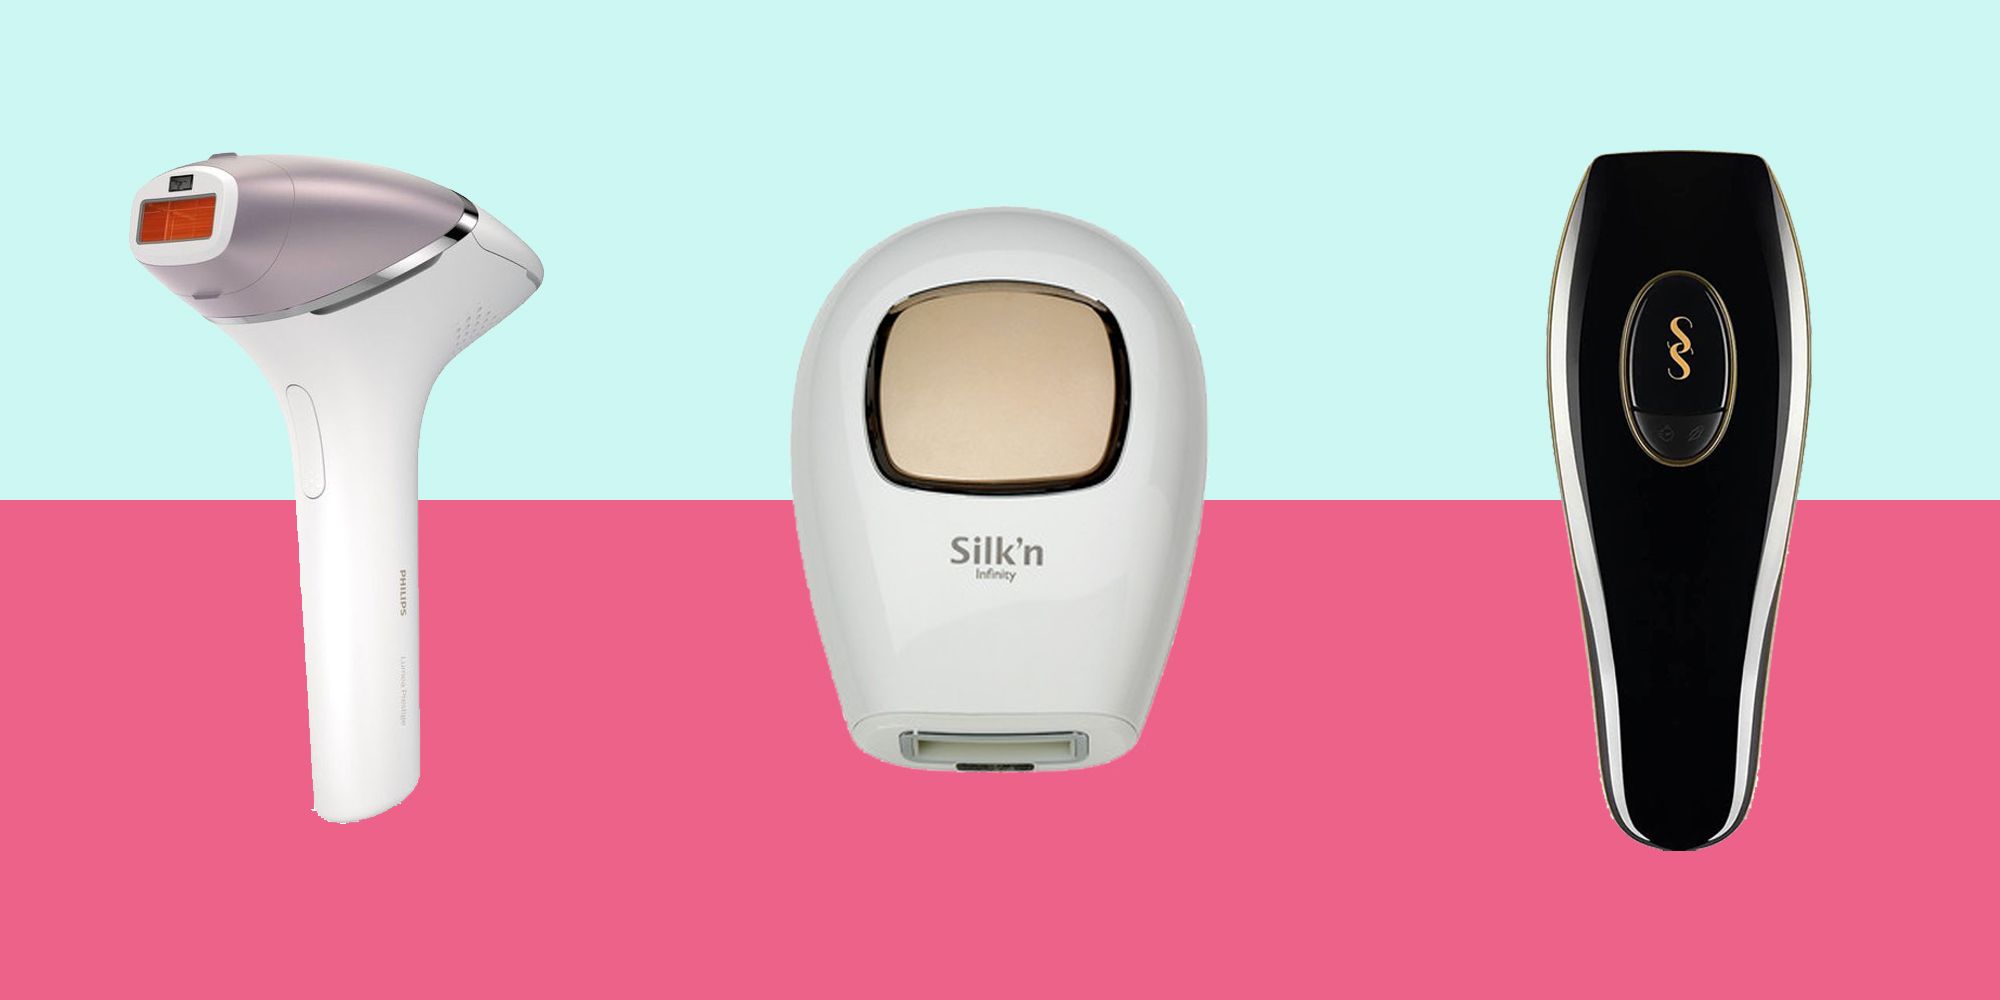 City pair sinner Best IPL hair removal devices to buy 2022 UK